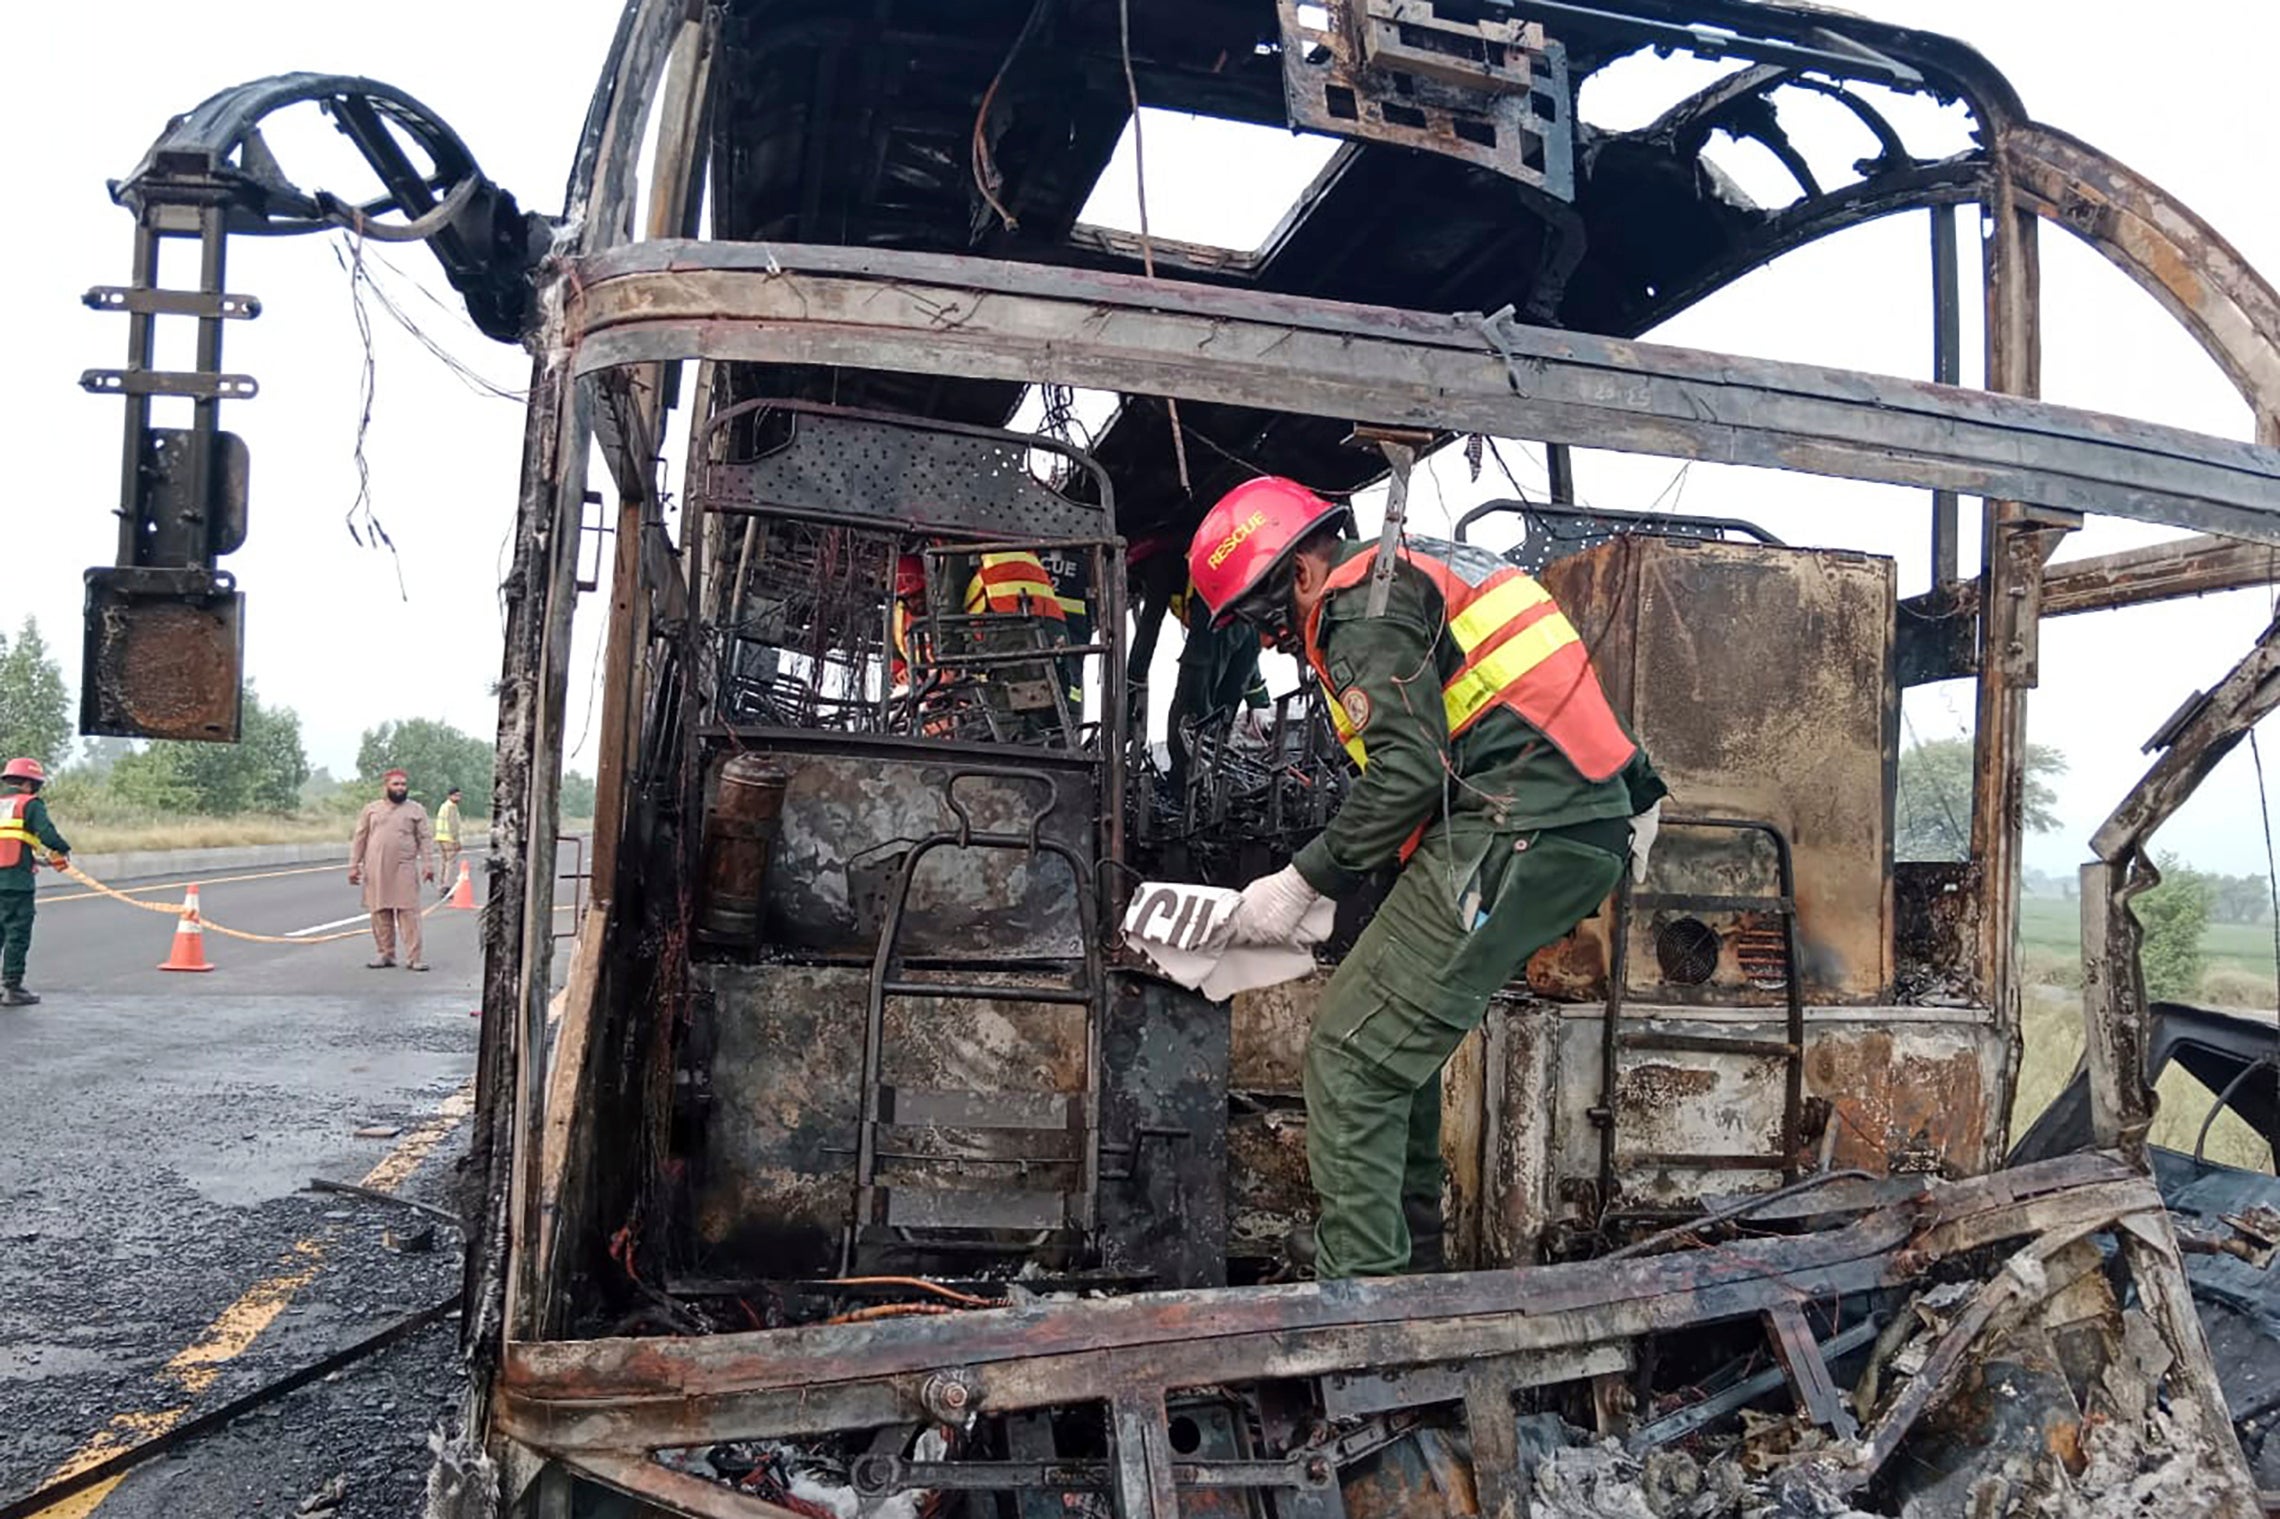 Rescue workers examine a burnt bus at the accident site on a highway in Pindi Bhattian, Pakistan